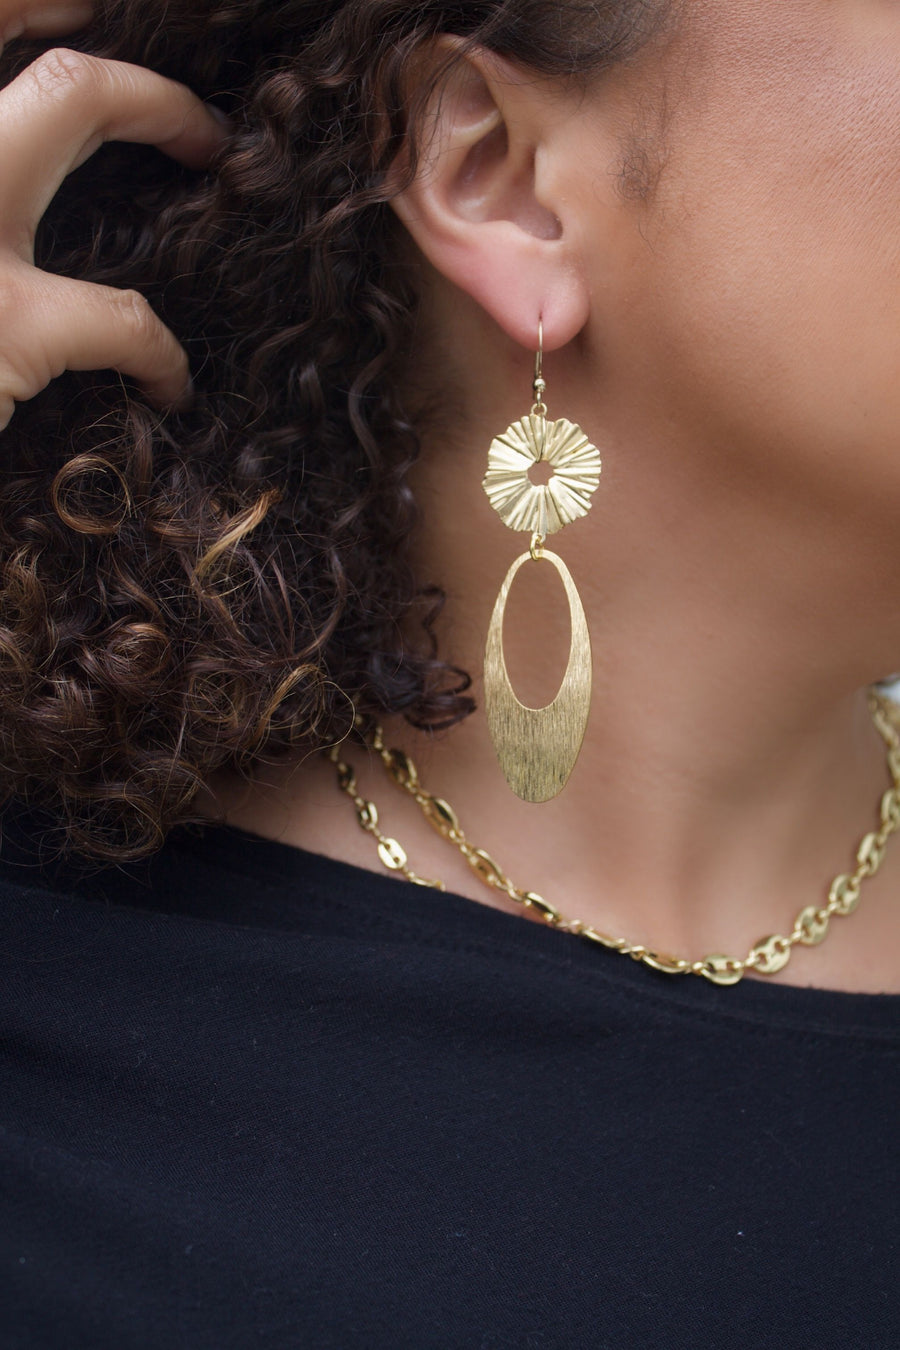 The Jada Earrings (hover over picture for other options)